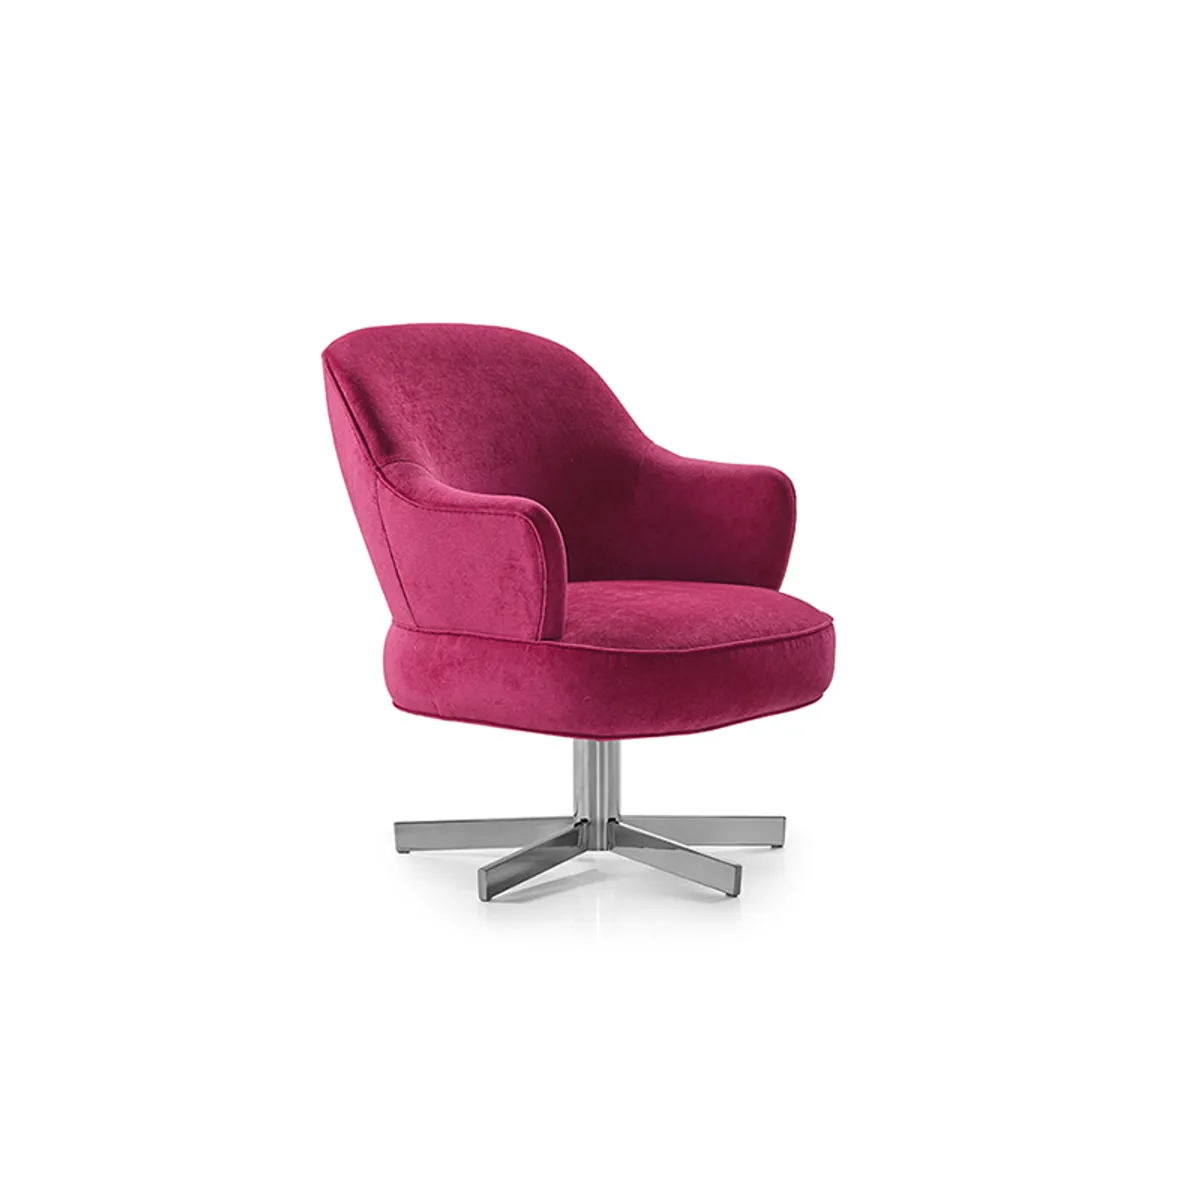 Nemo Low Armchair With Swivel Base For Upmarket Office Spaces 1911